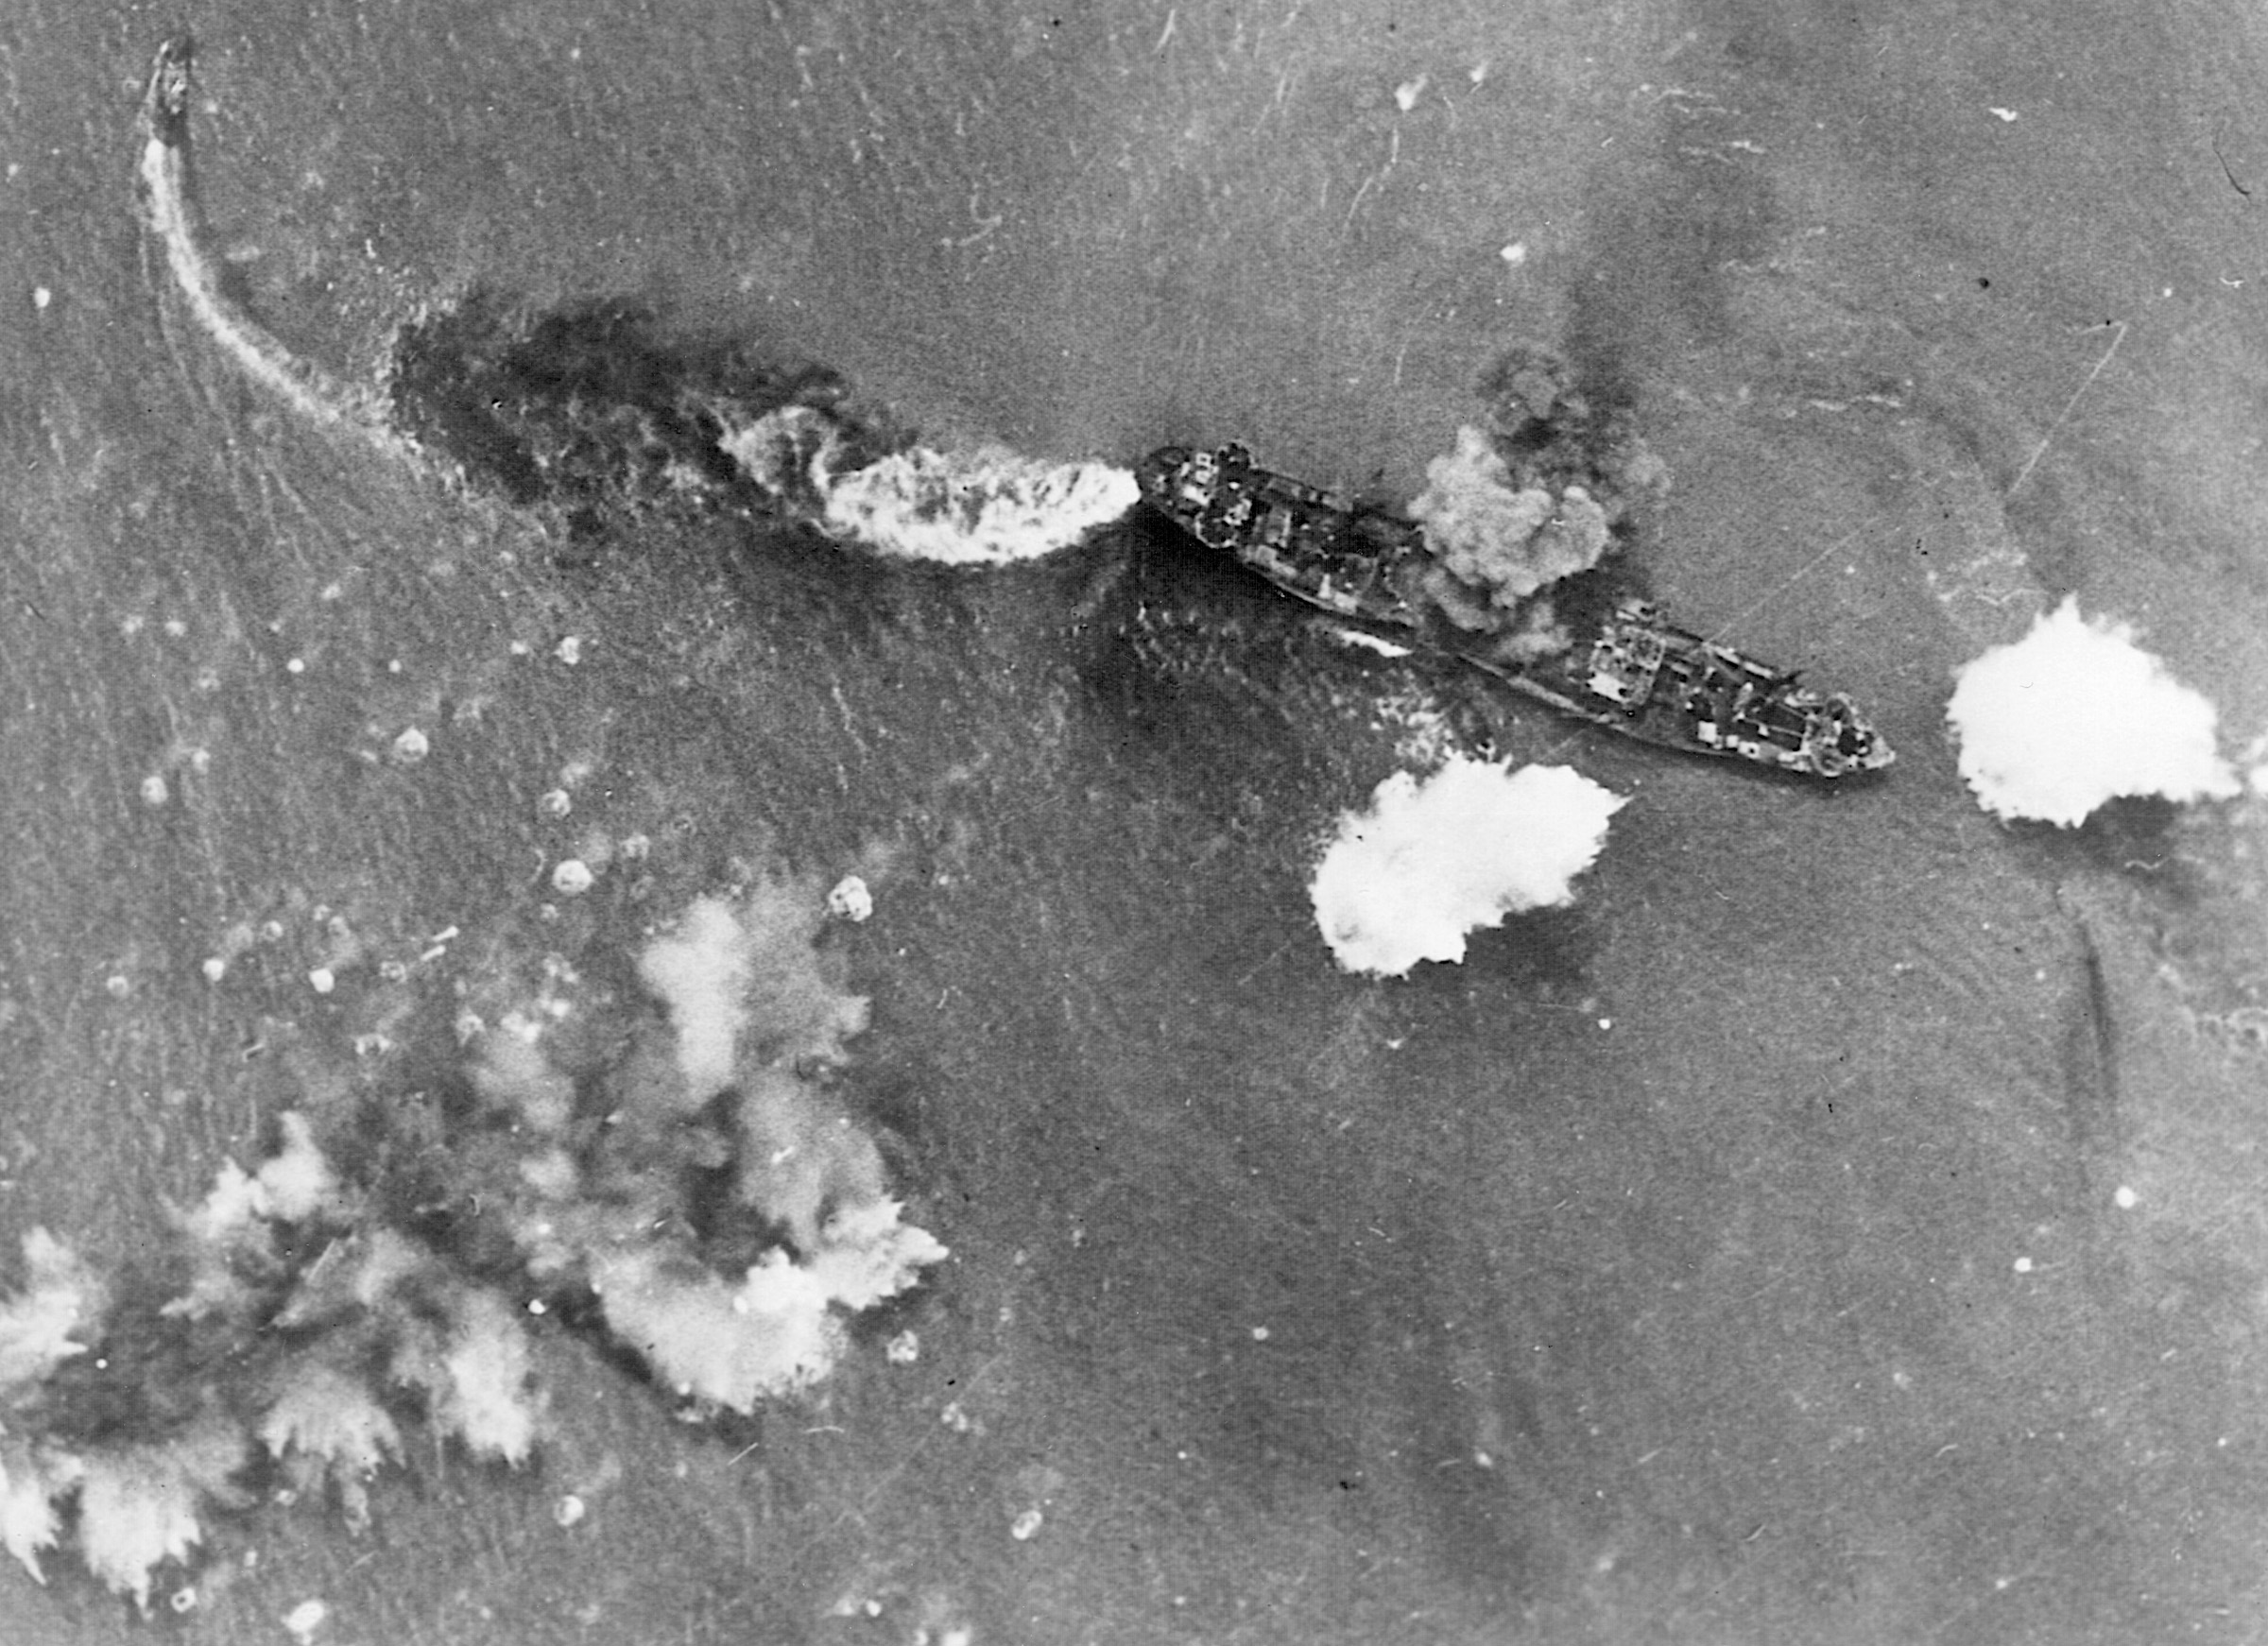 A stricken Japanese vessel billows smoke from a bomb hit amidships while a fire rages in the stern. Moments later, the transport settled to the bottom of the Bismarck Sea. A smaller boat attempts to escape the debacle.